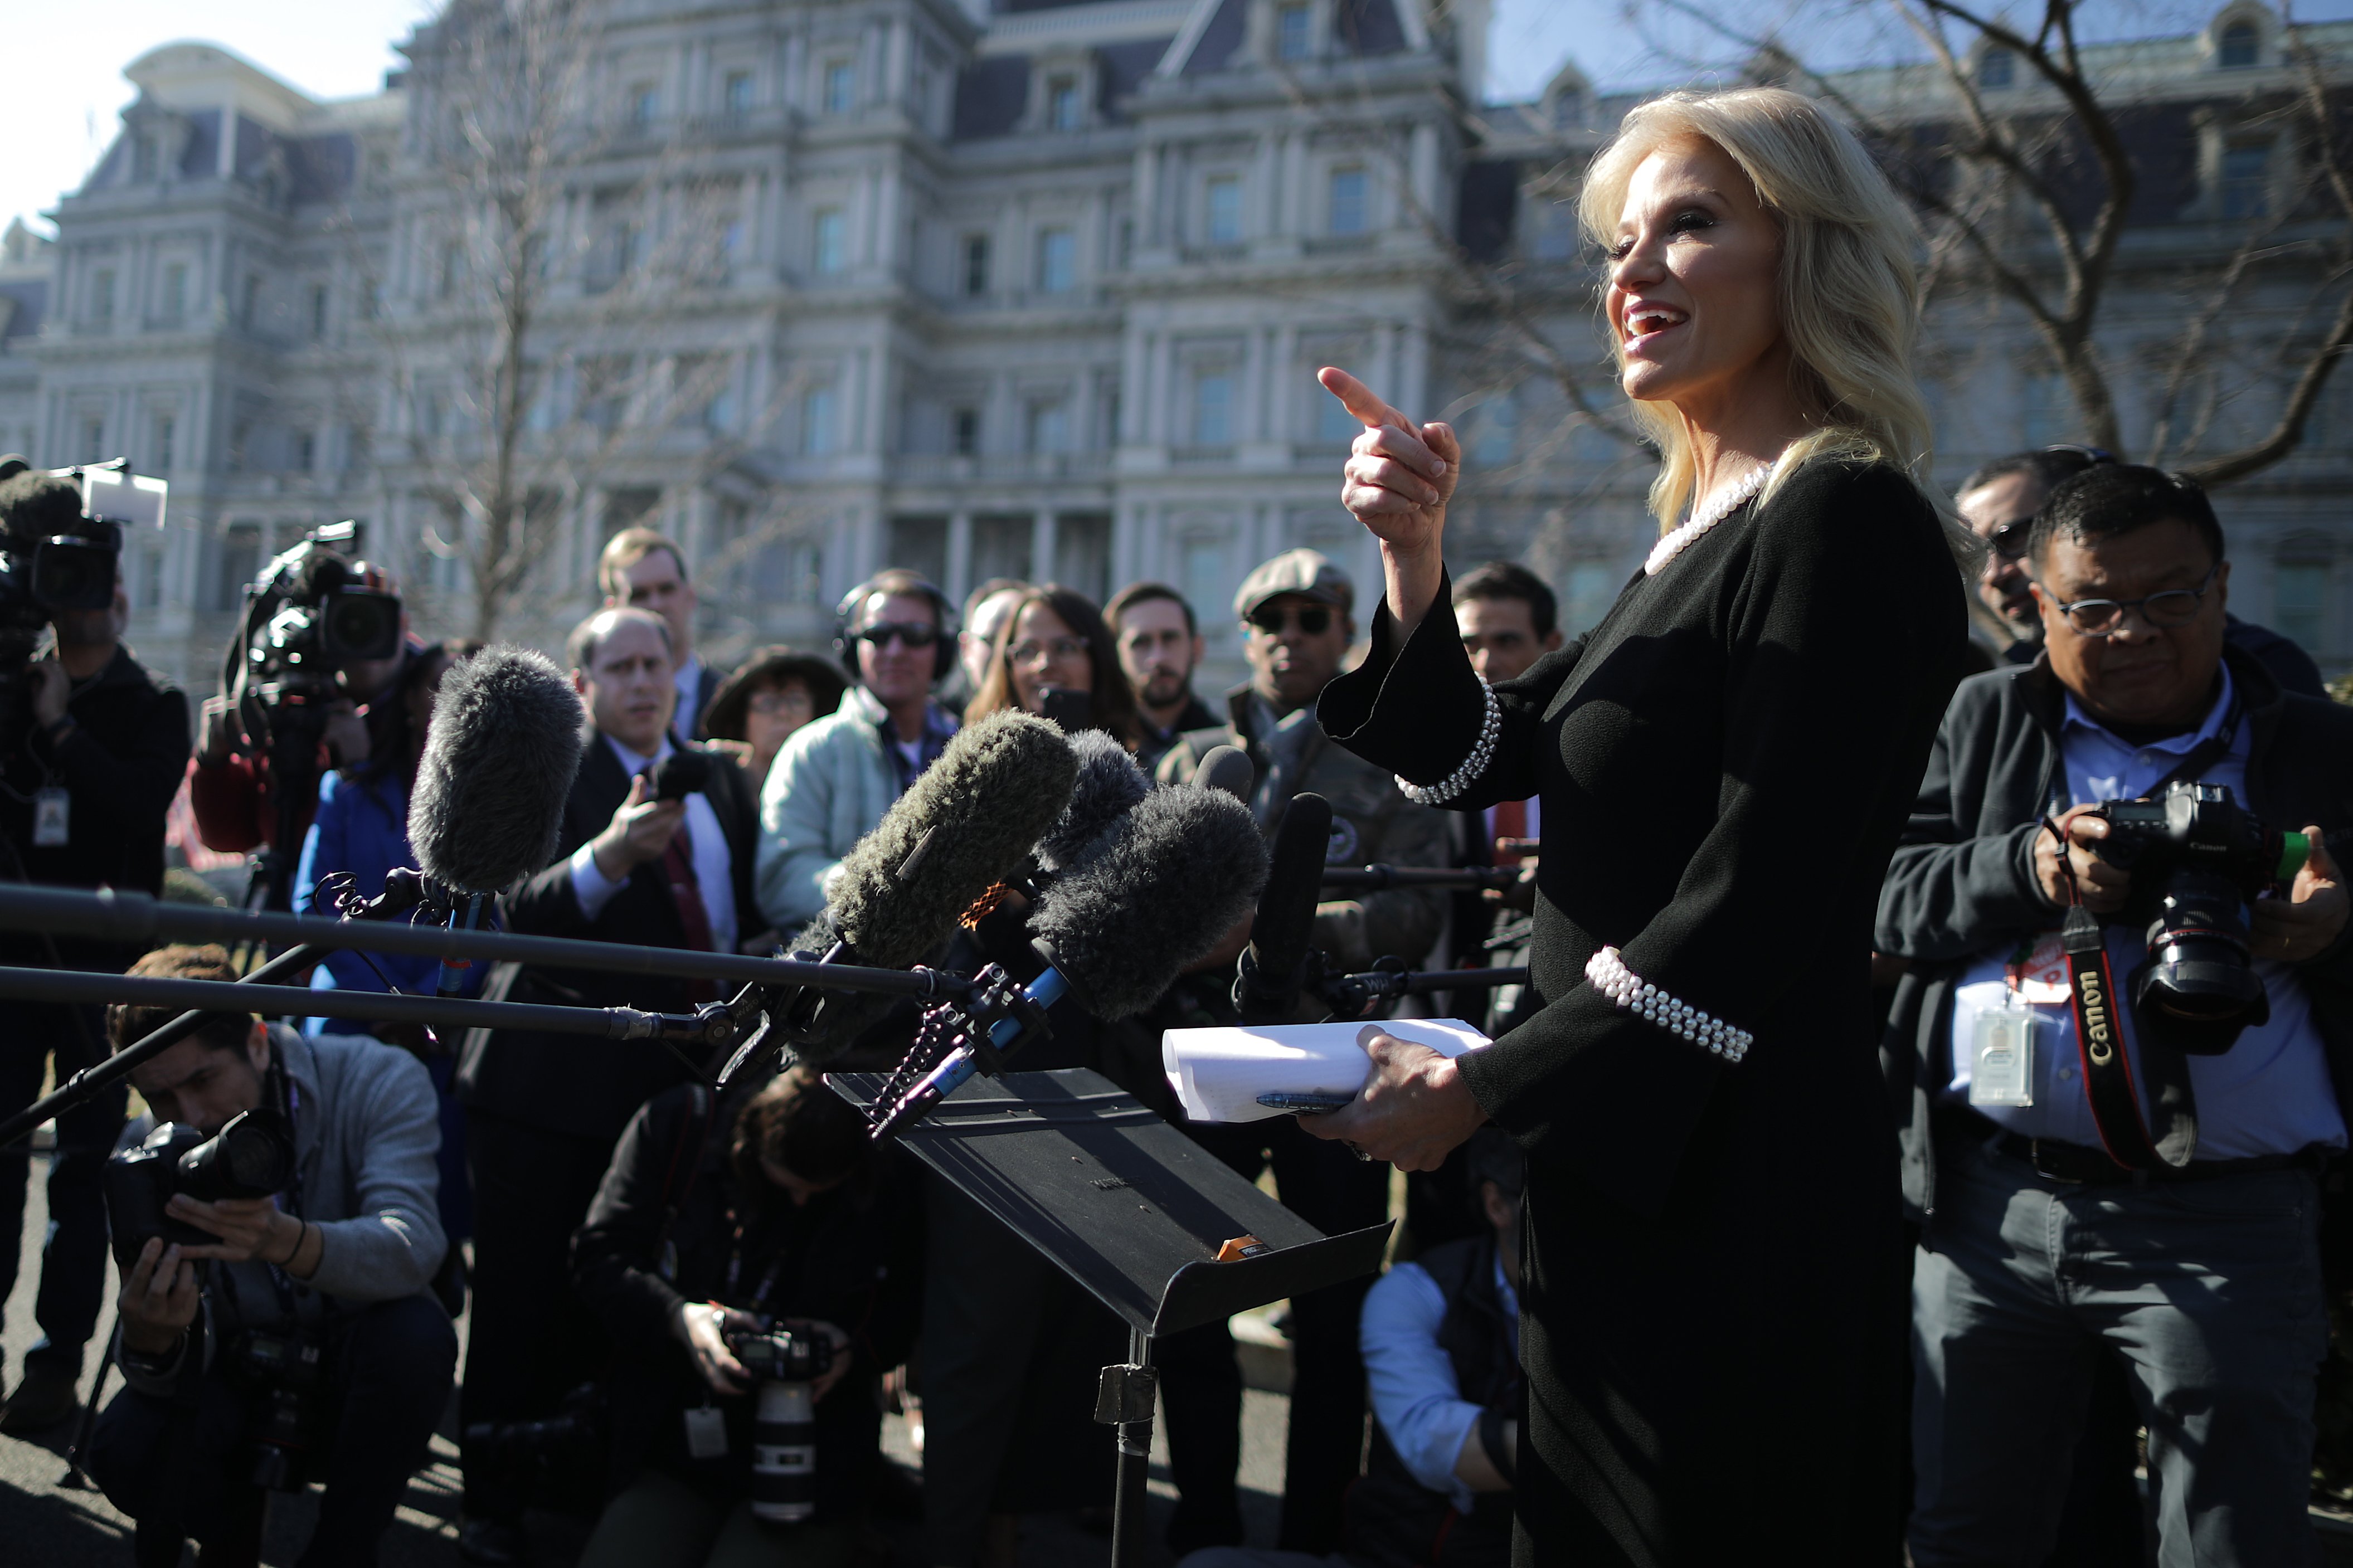 White House Counselor to the President Kellyanne Conway talks to journalists outside the West Wing at the White House February 04, 2019 in Washington, DC. (Photo by Chip Somodevilla/Getty Images)